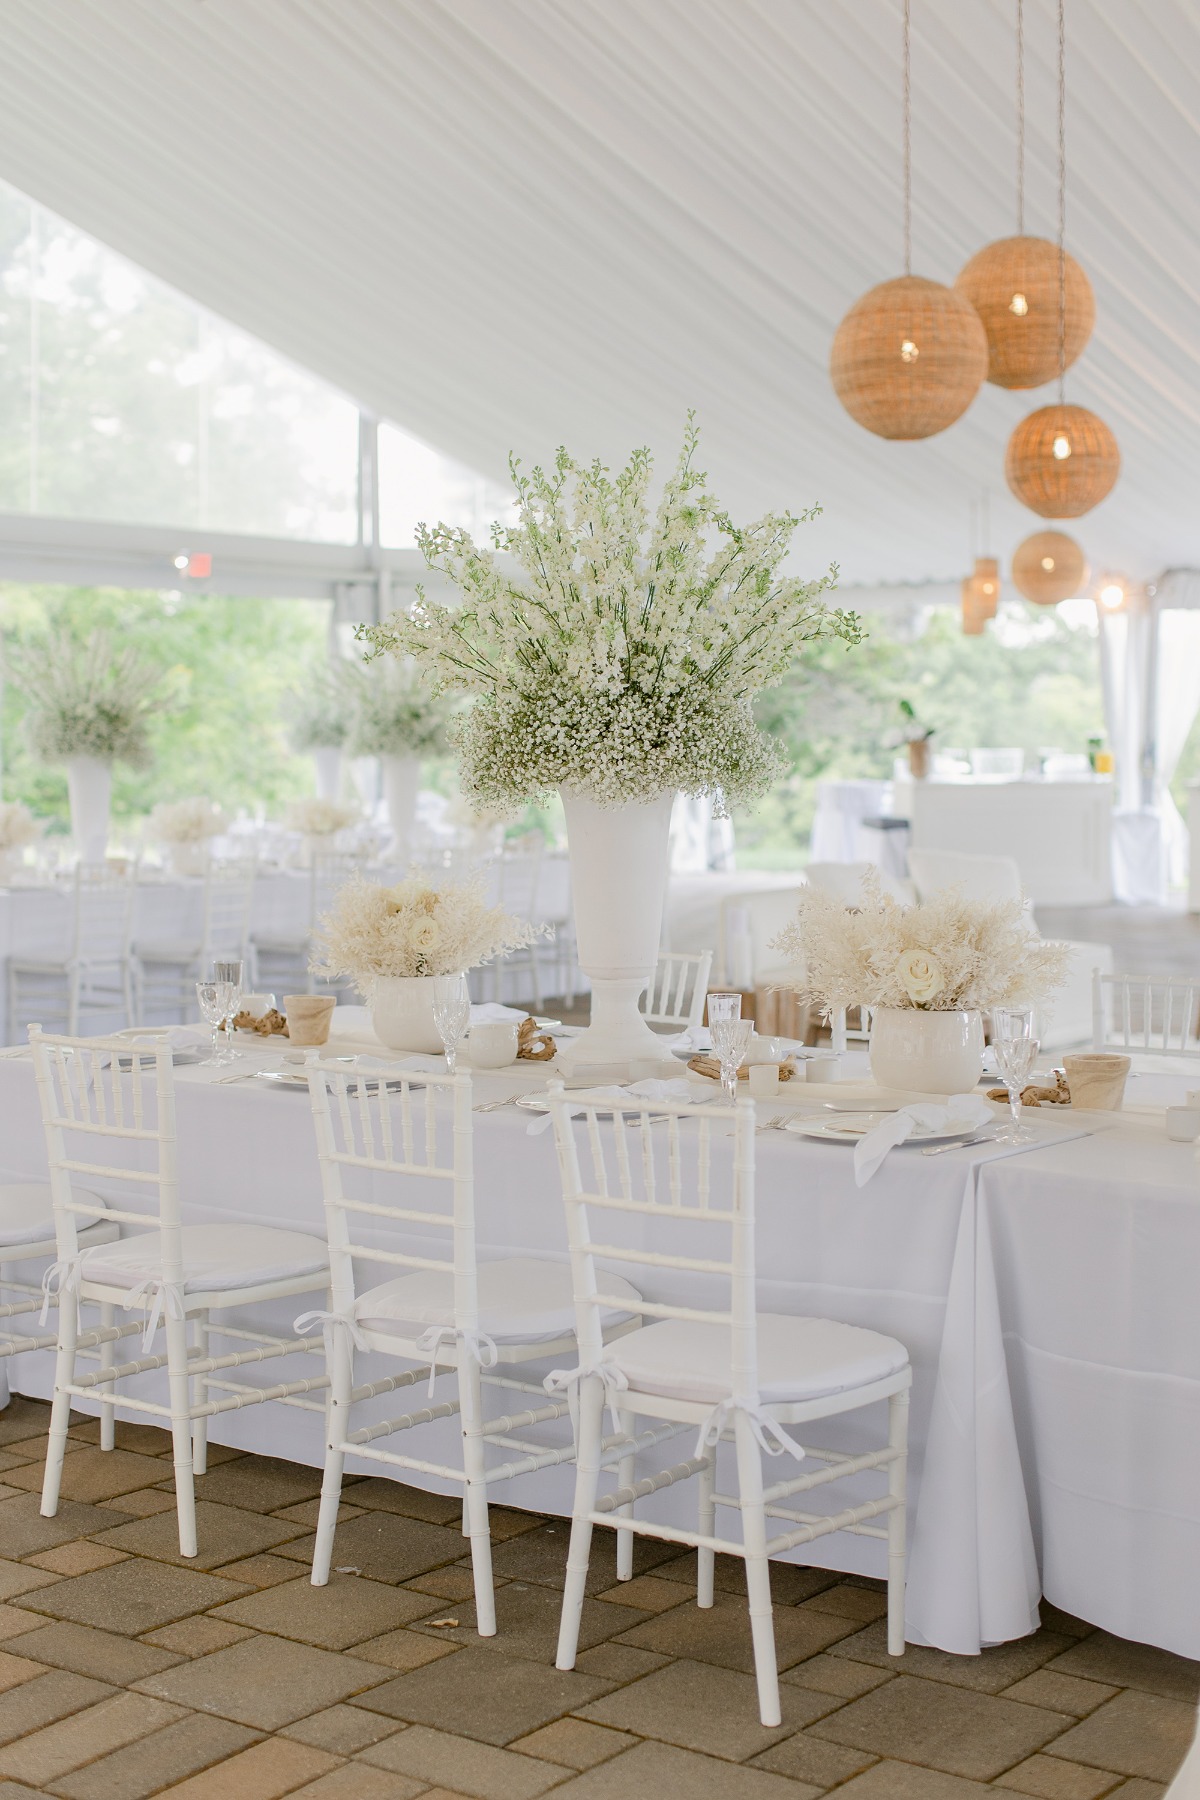 Reception table with centerpieces